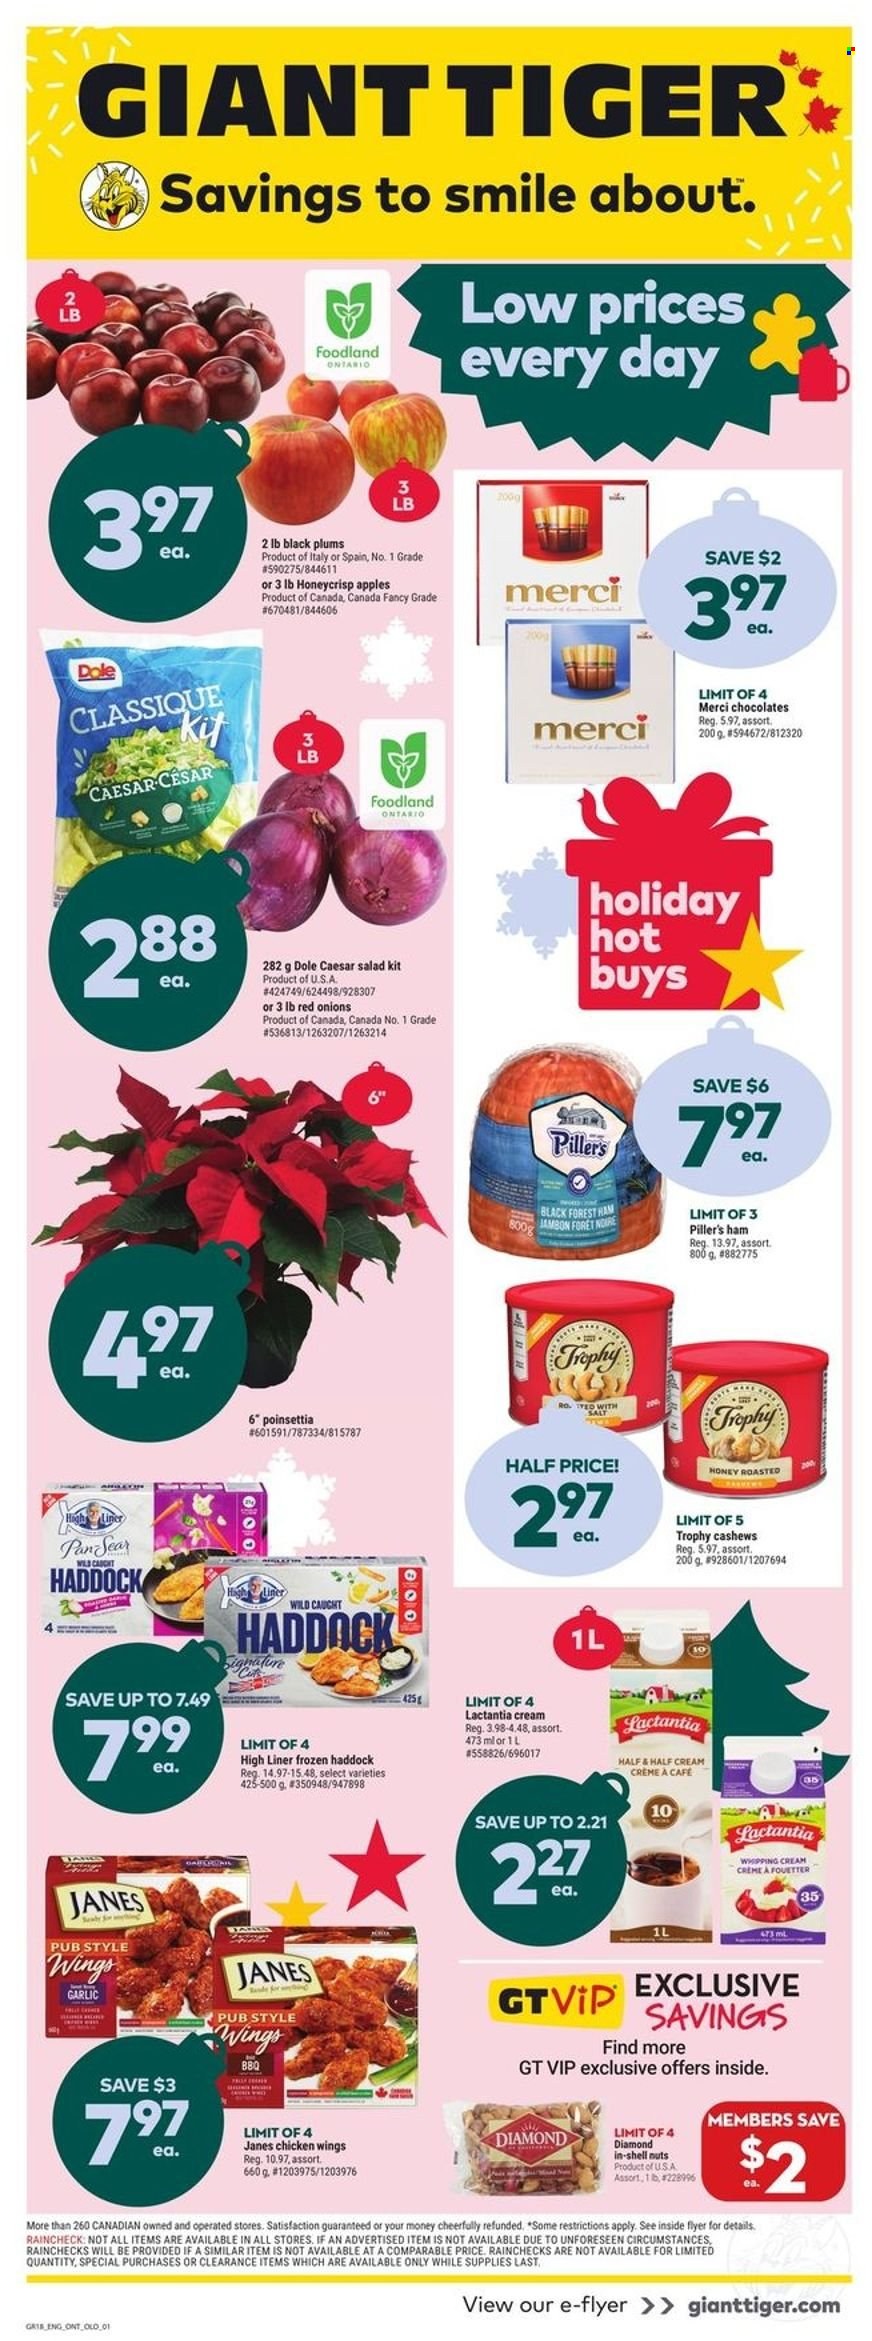 thumbnail - Giant Tiger Flyer - November 30, 2022 - December 06, 2022 - Sales products - garlic, red onions, onion, salad, Dole, apples, plums, black plums, haddock, ham, whipping cream, chicken wings, chocolate, Merci, cashews, Half and half, pan, poinsettia, Shell. Page 1.